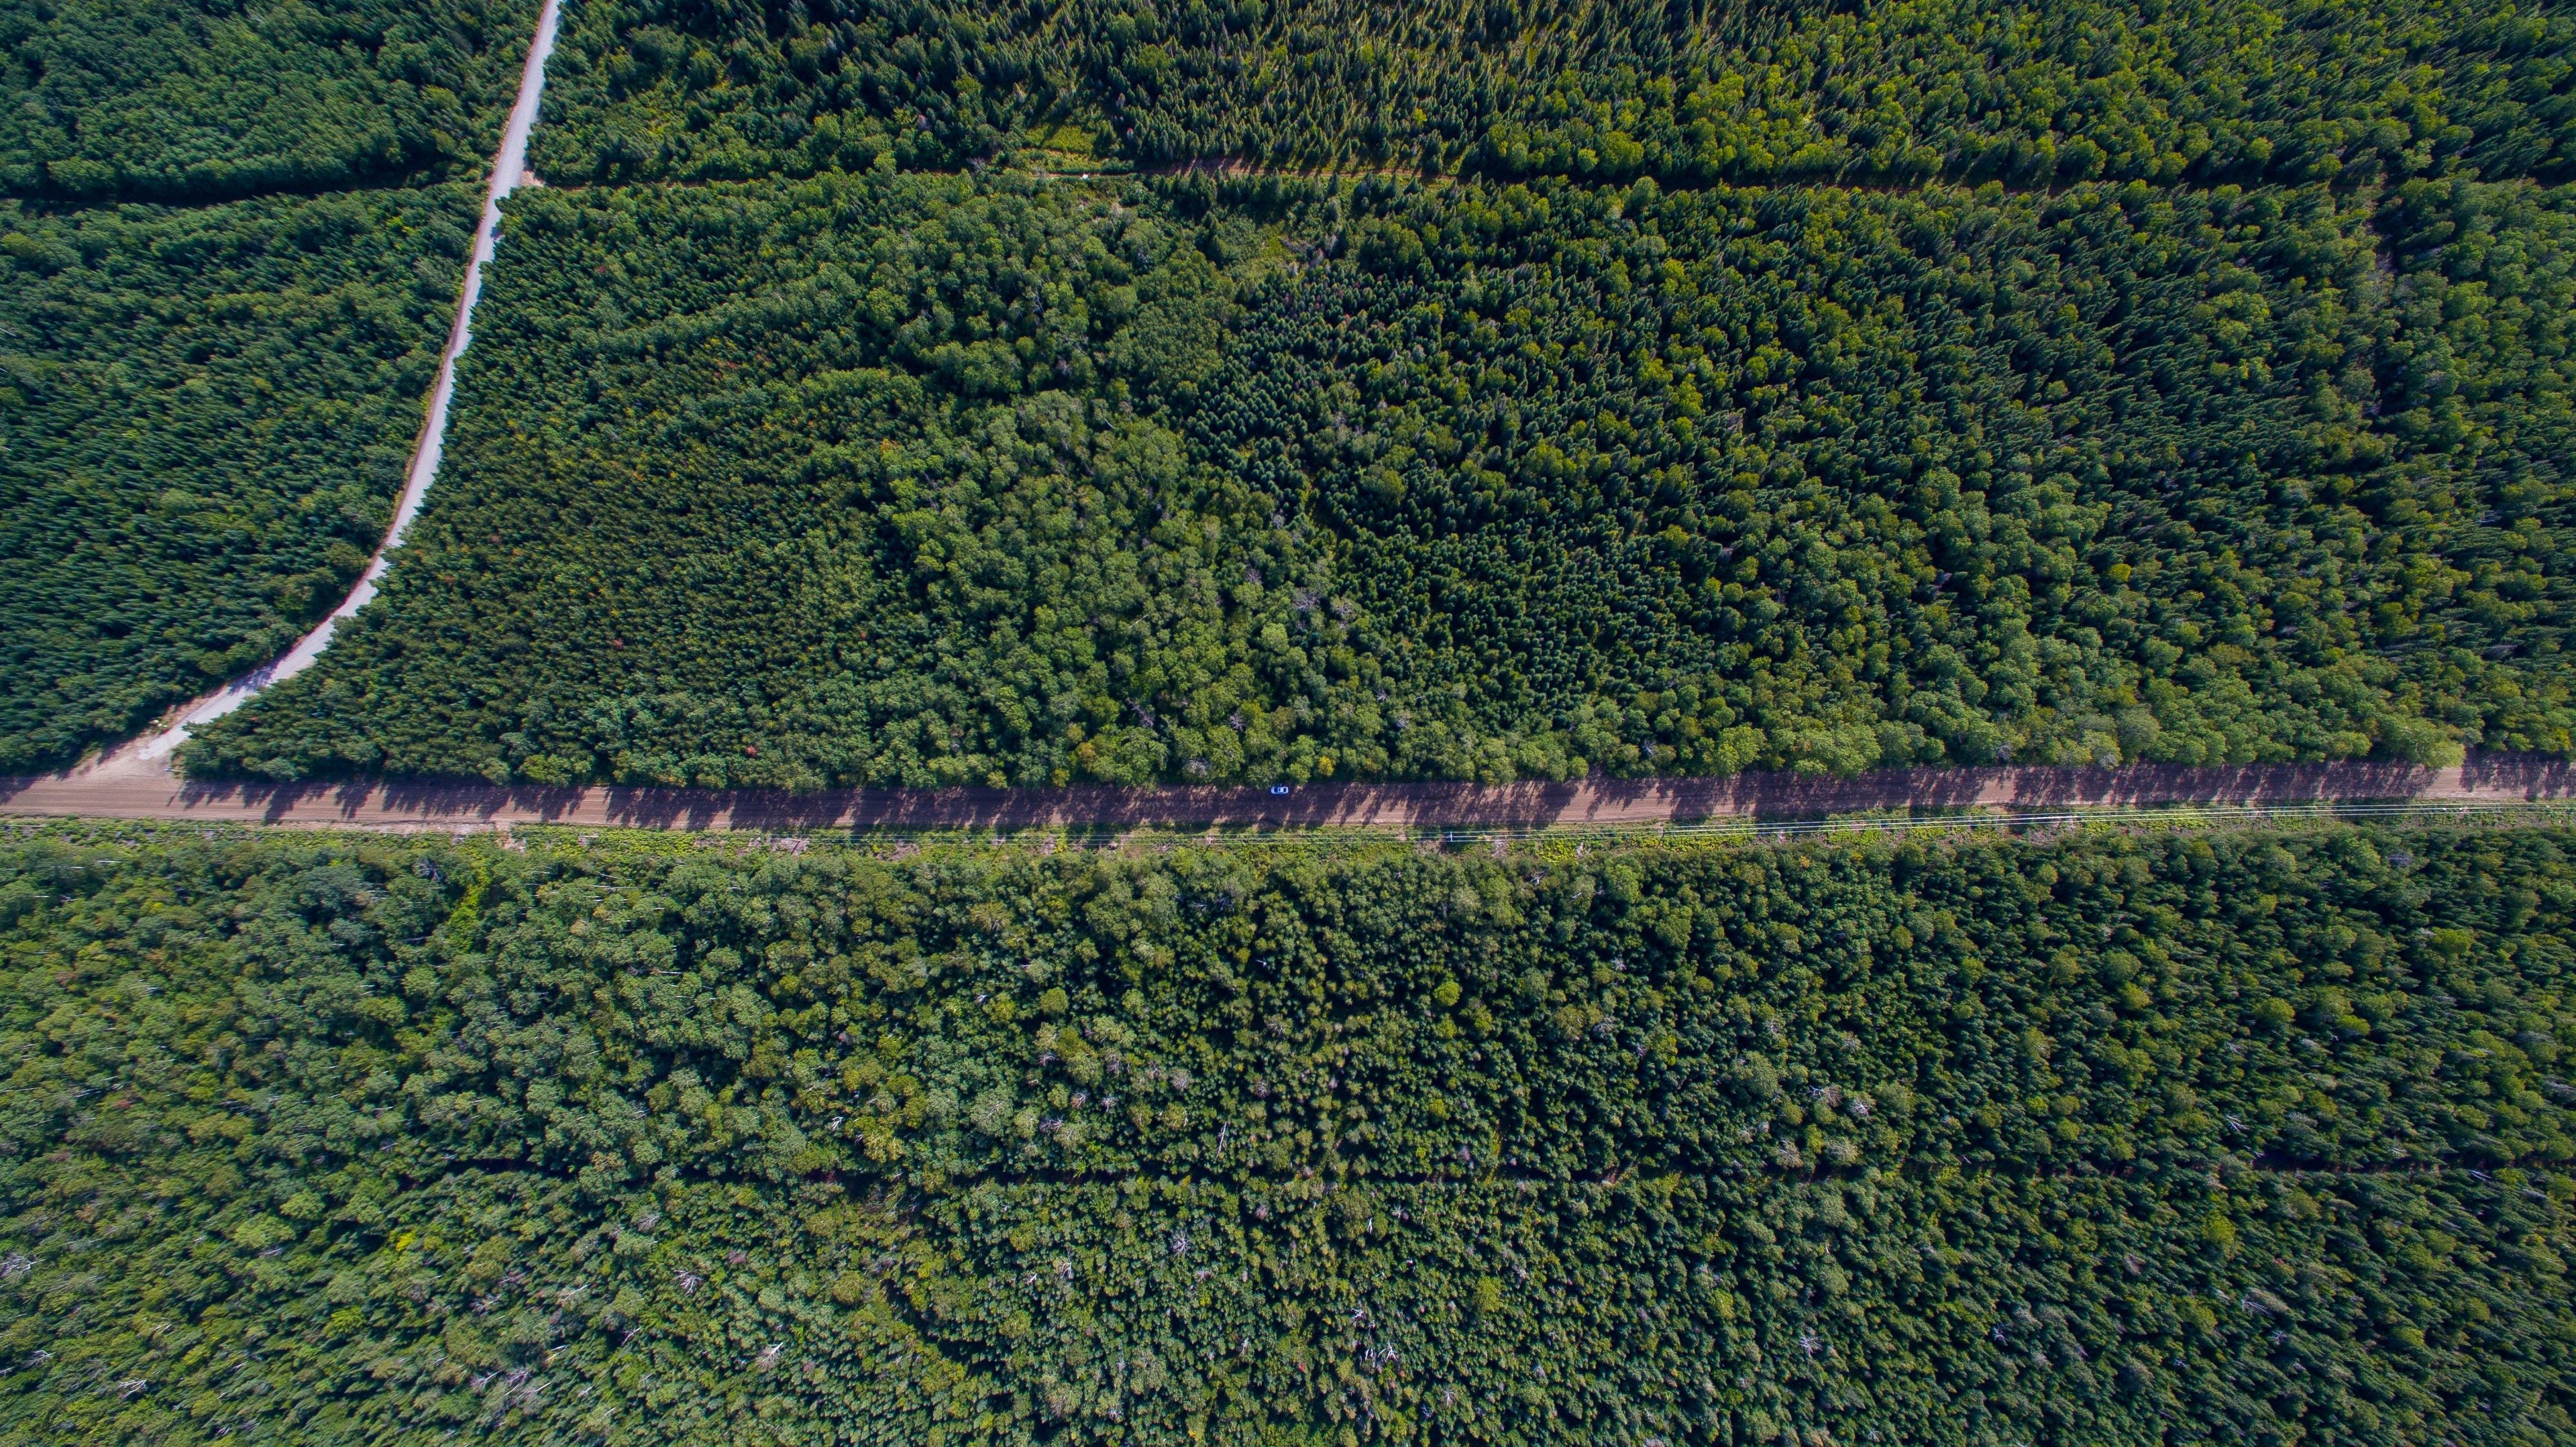 An aerial view of a dense forest with a winding dirt road cutting through. The perspective offers a bird's-eye view of the lush green canopy and the road below.